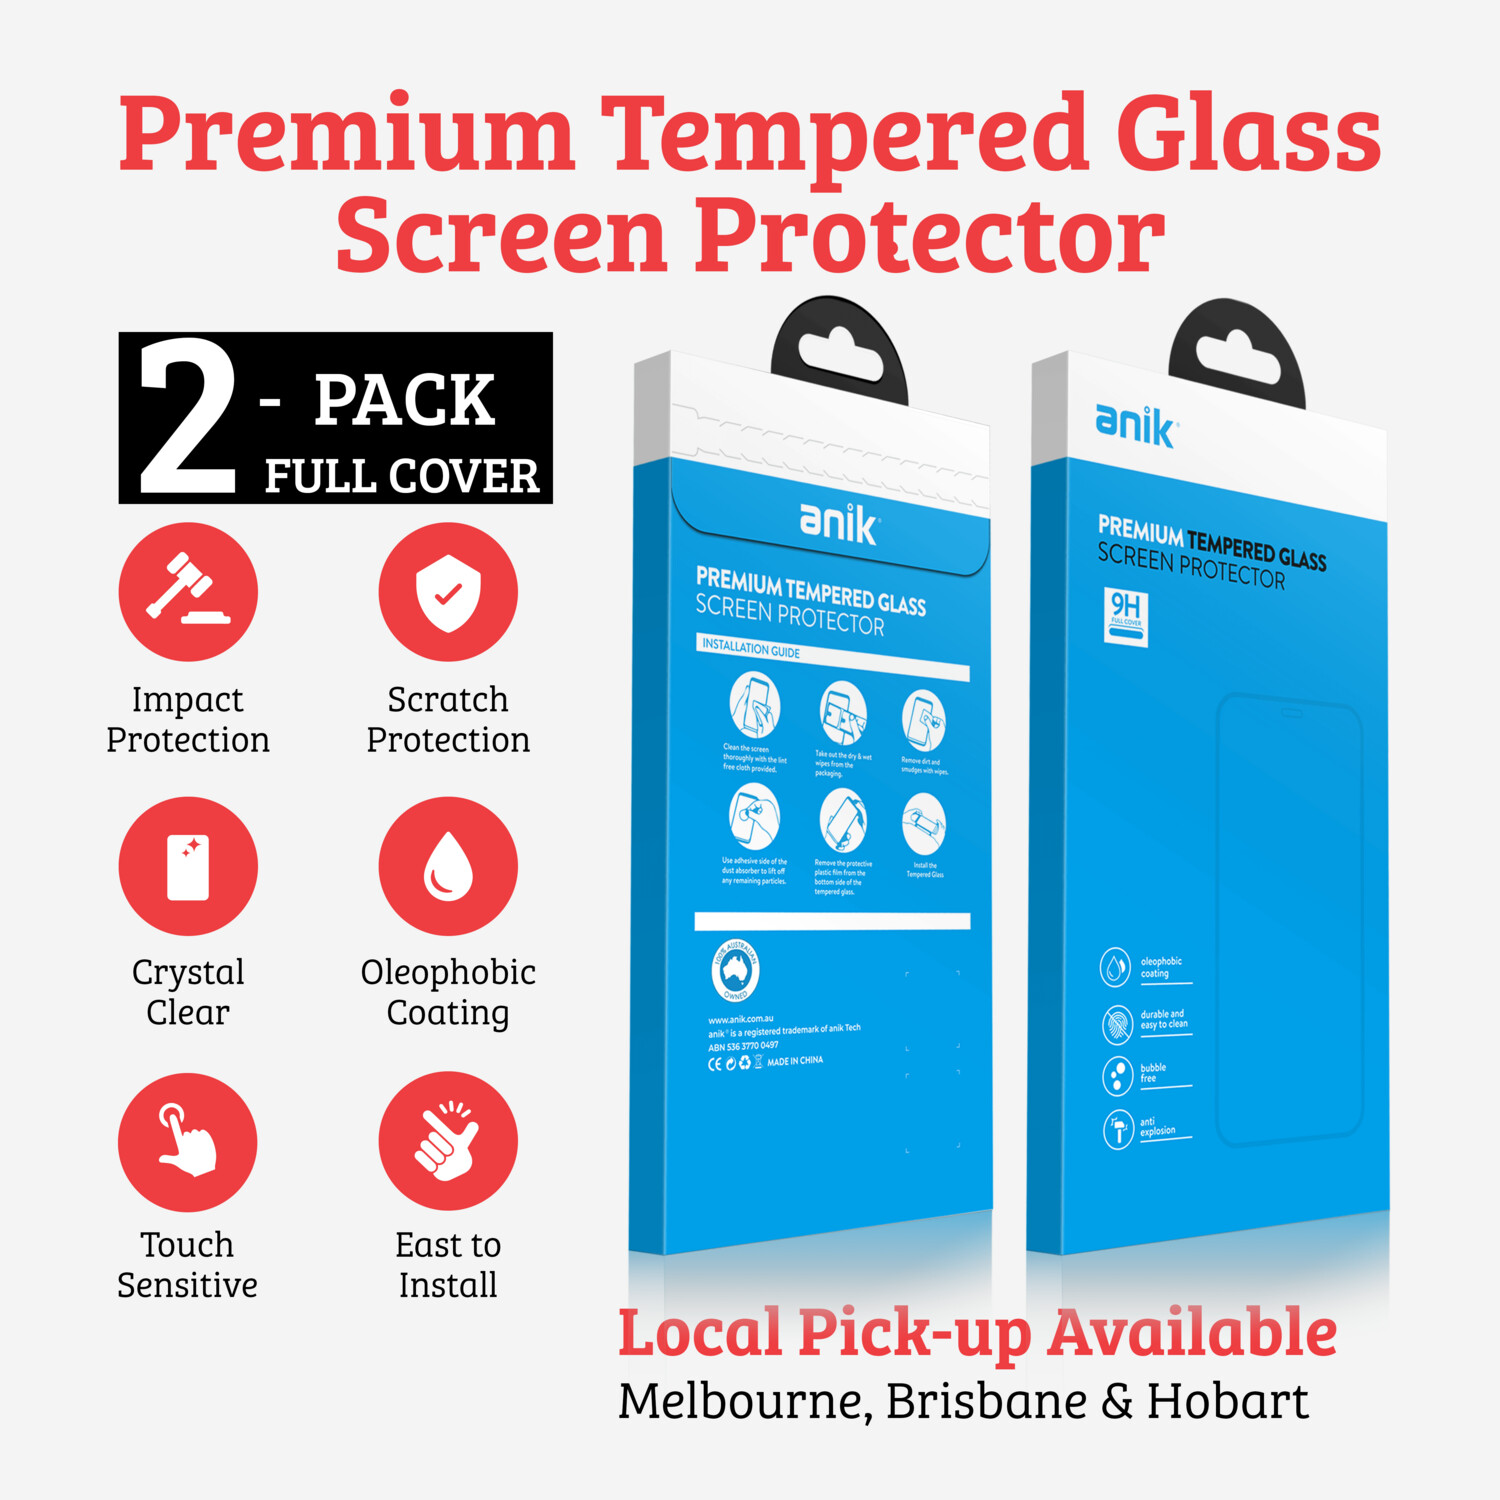 ANIK Premium Full Cover Tempered Glass Screen Protector for iPhone XR [2 Pack]